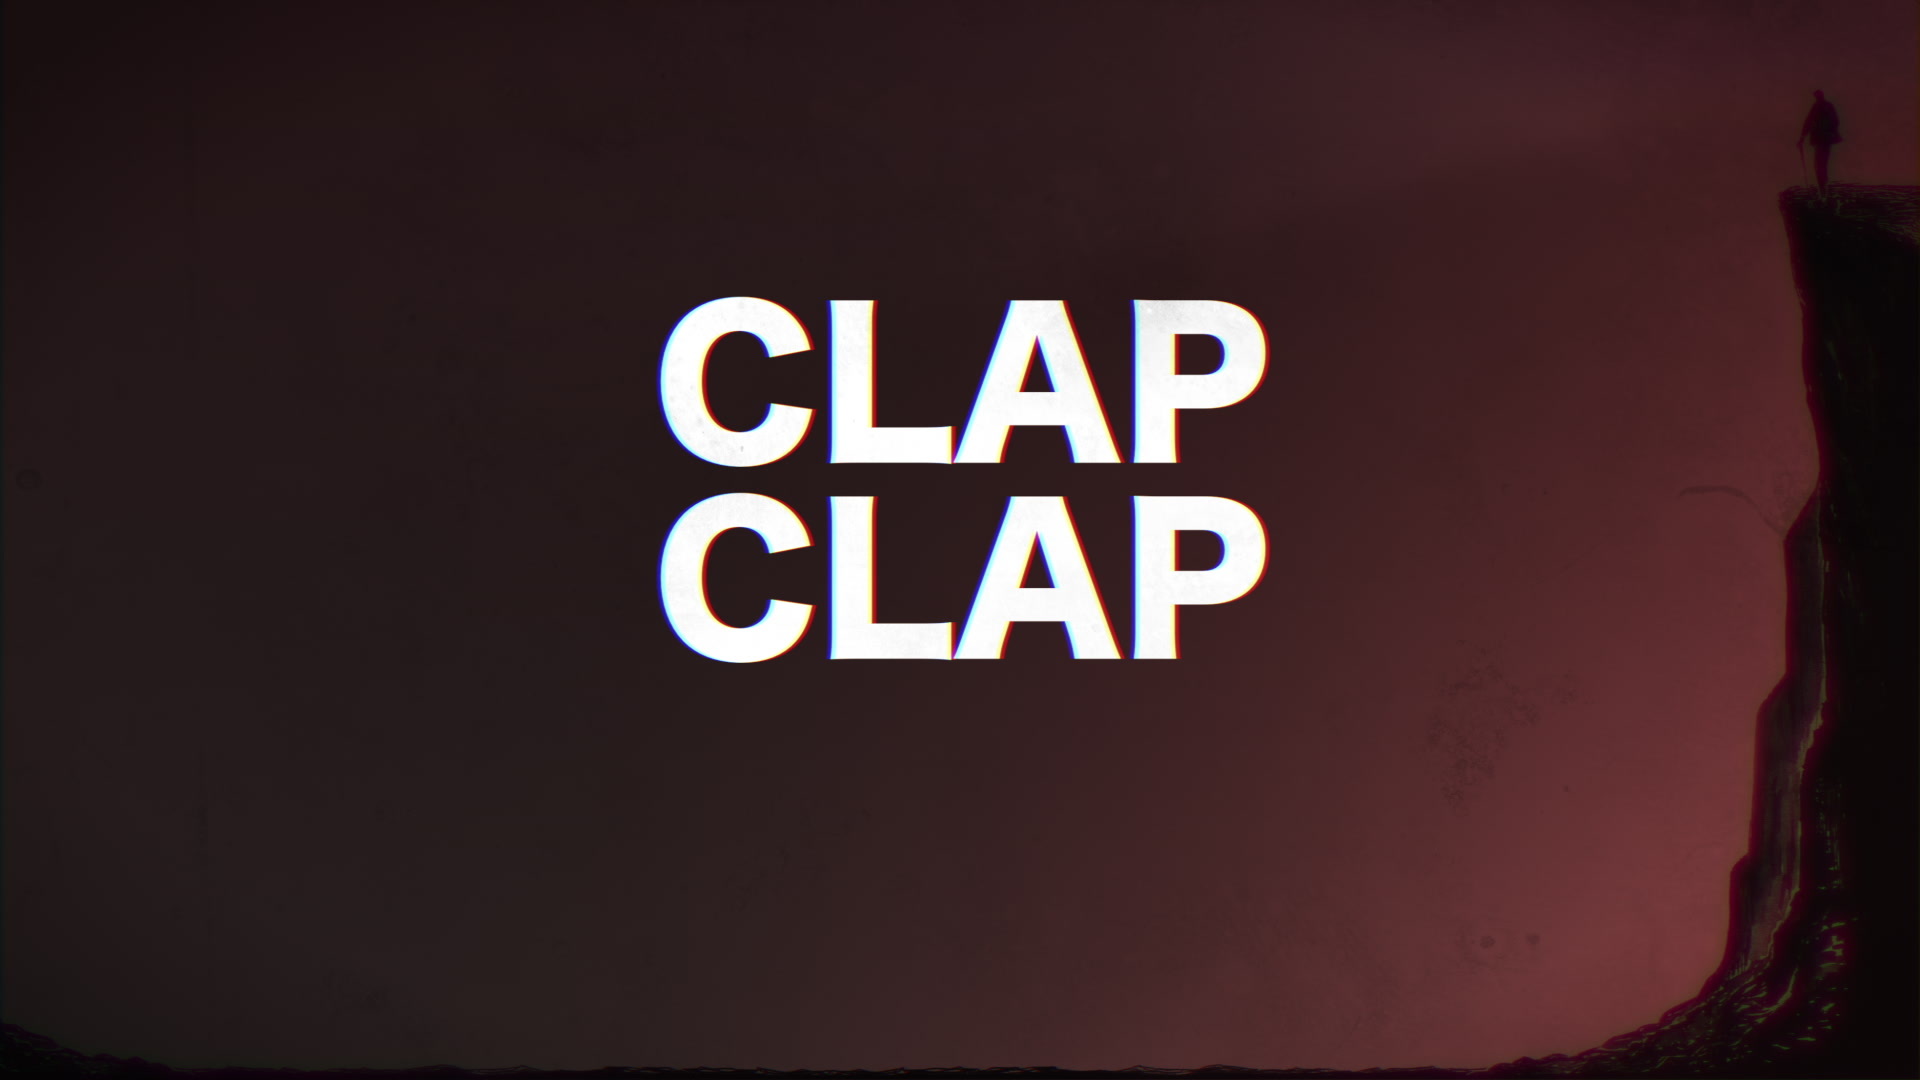 The Clapping Song